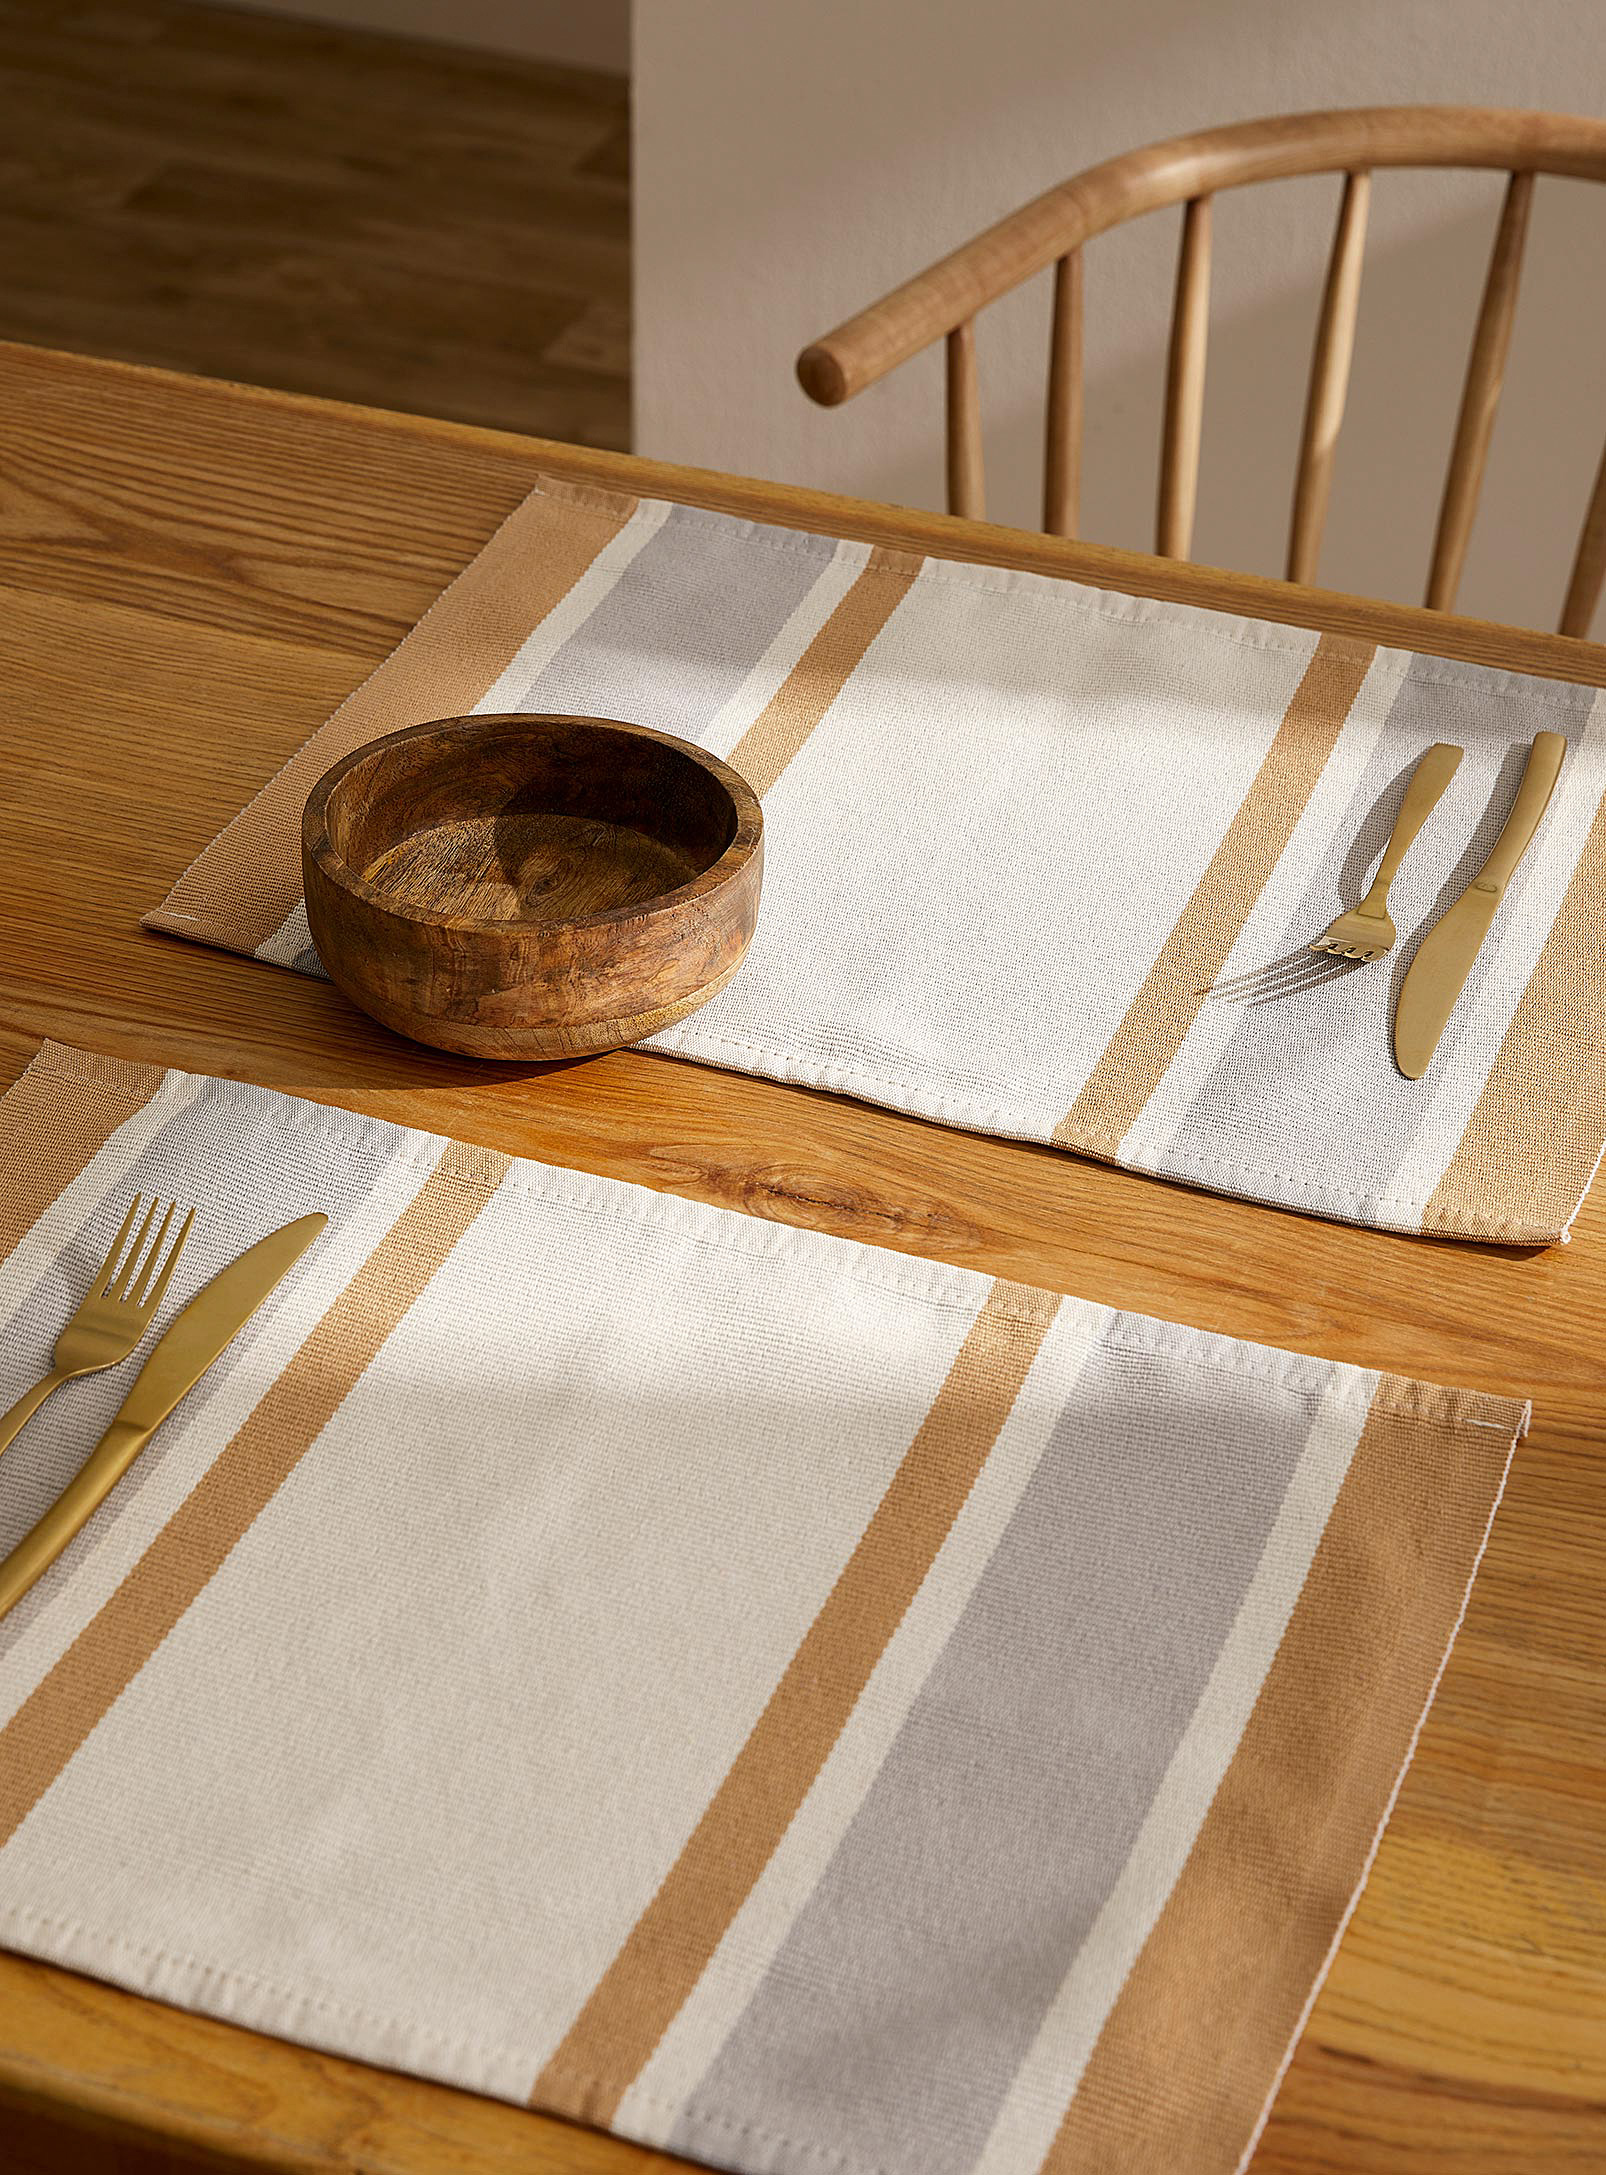 Simons Maison Neutral Stripes Placemats Set Of 2 In Patterned Brown